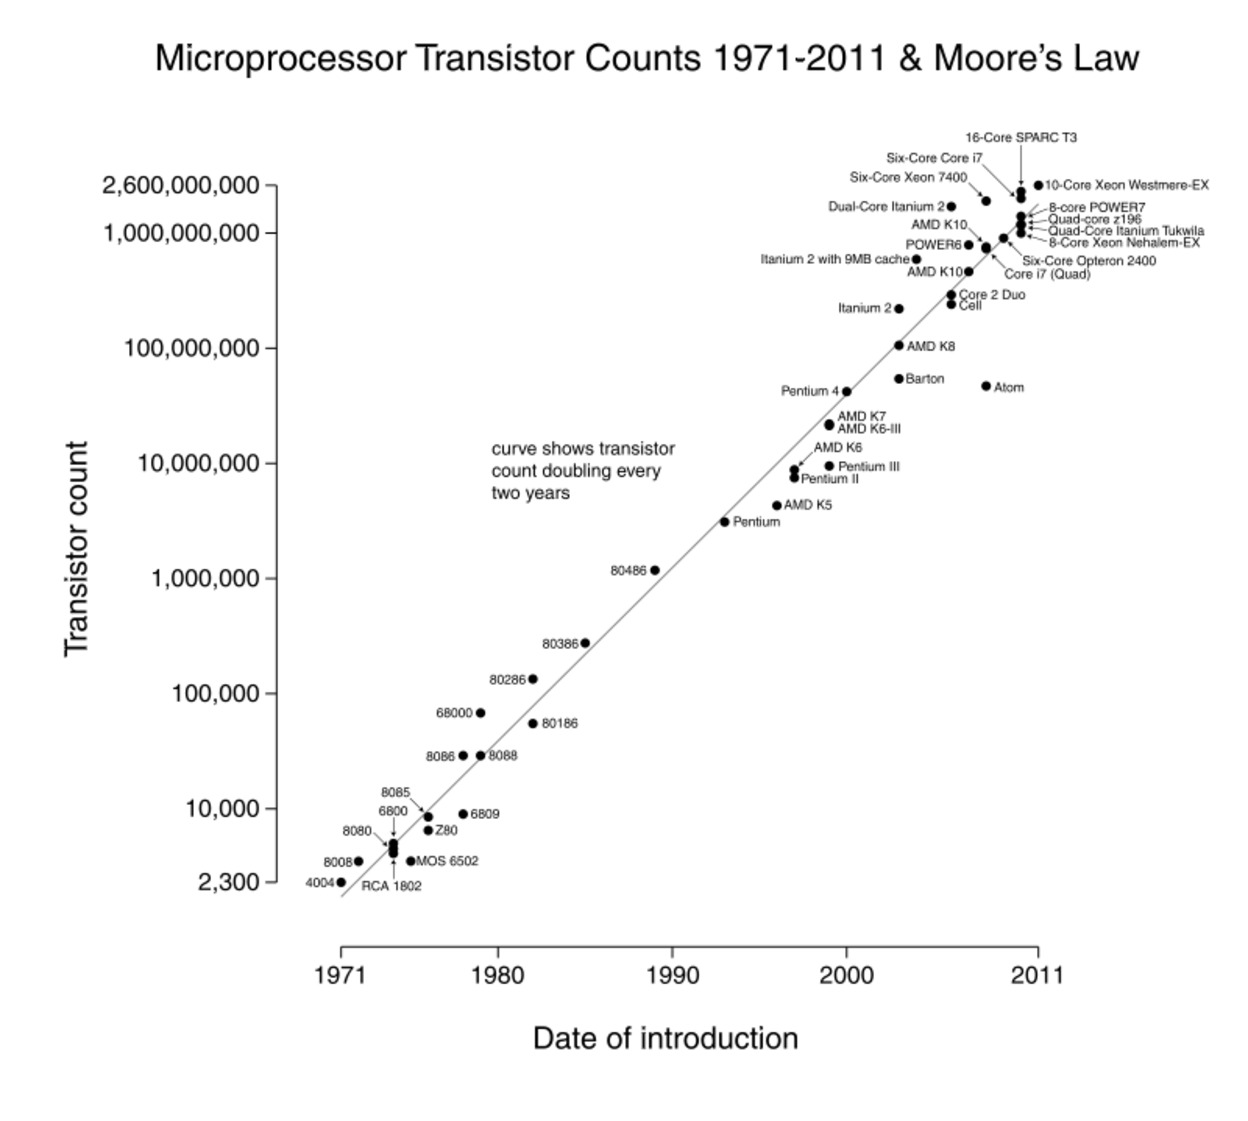 Moore's Law